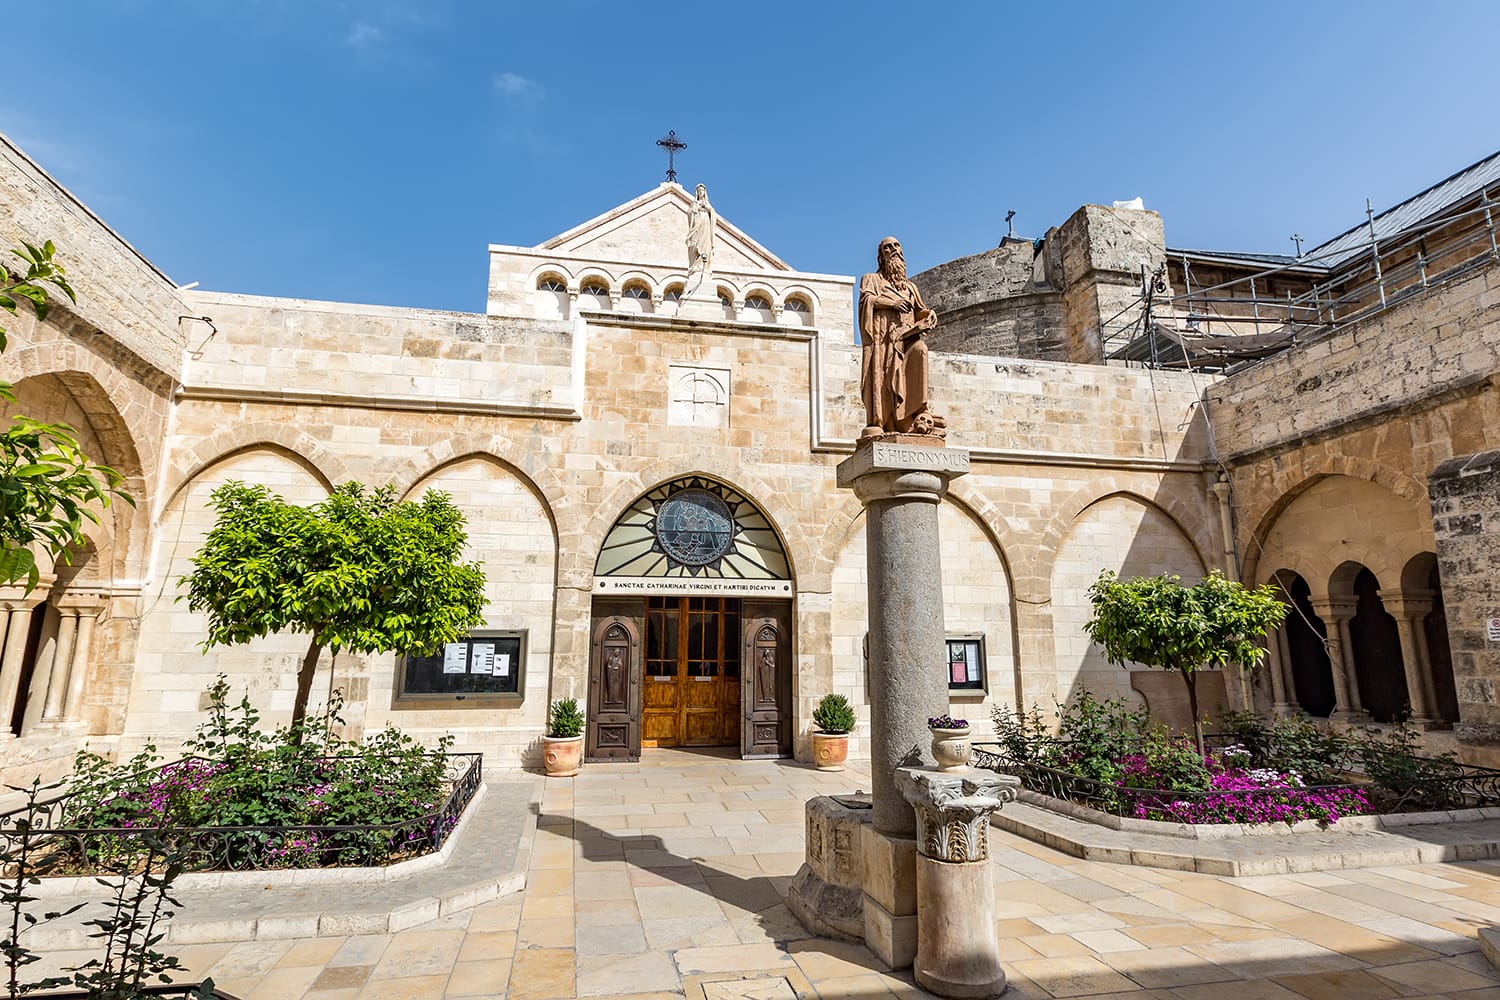 The statue to the St. Jerome located in the middle of the inner courtyard of the Church of the Nativity in Bethlehem.